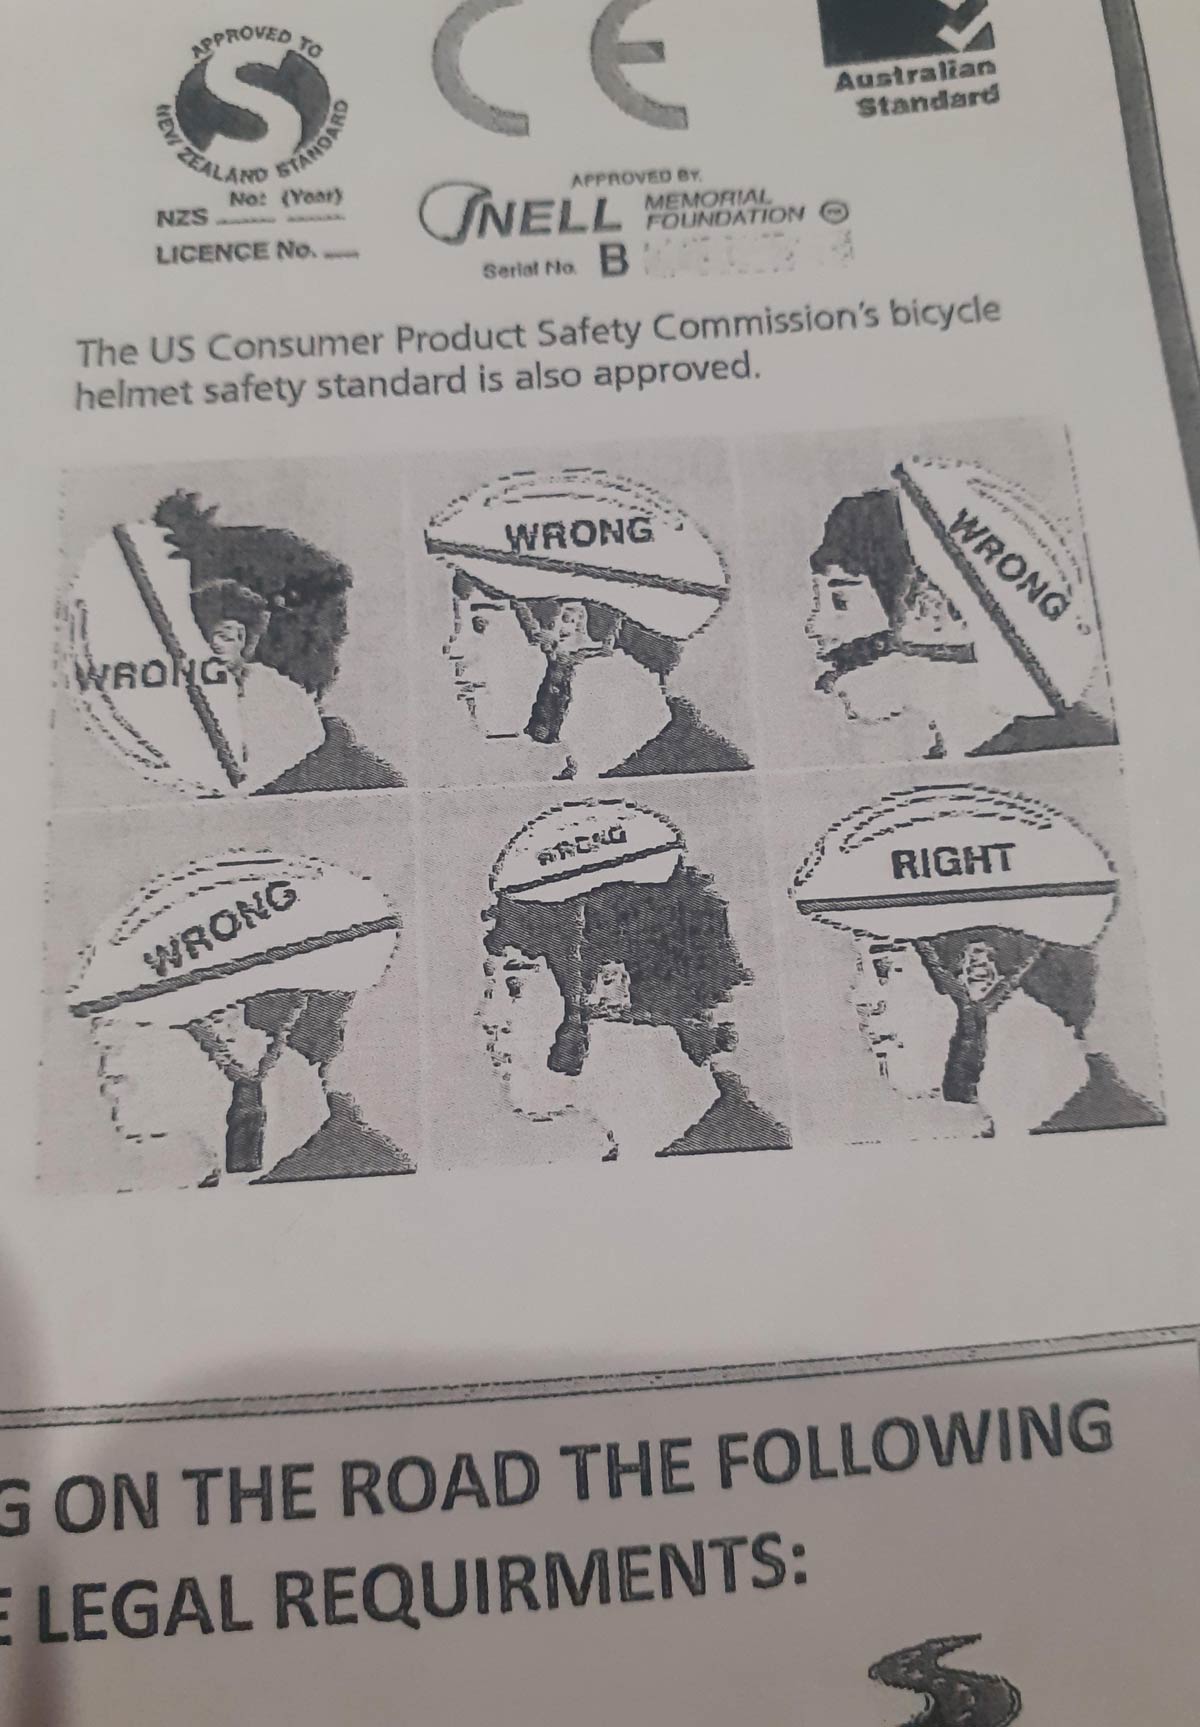 My son's school sent him home with a guide on how to properly operate a cycle helmet